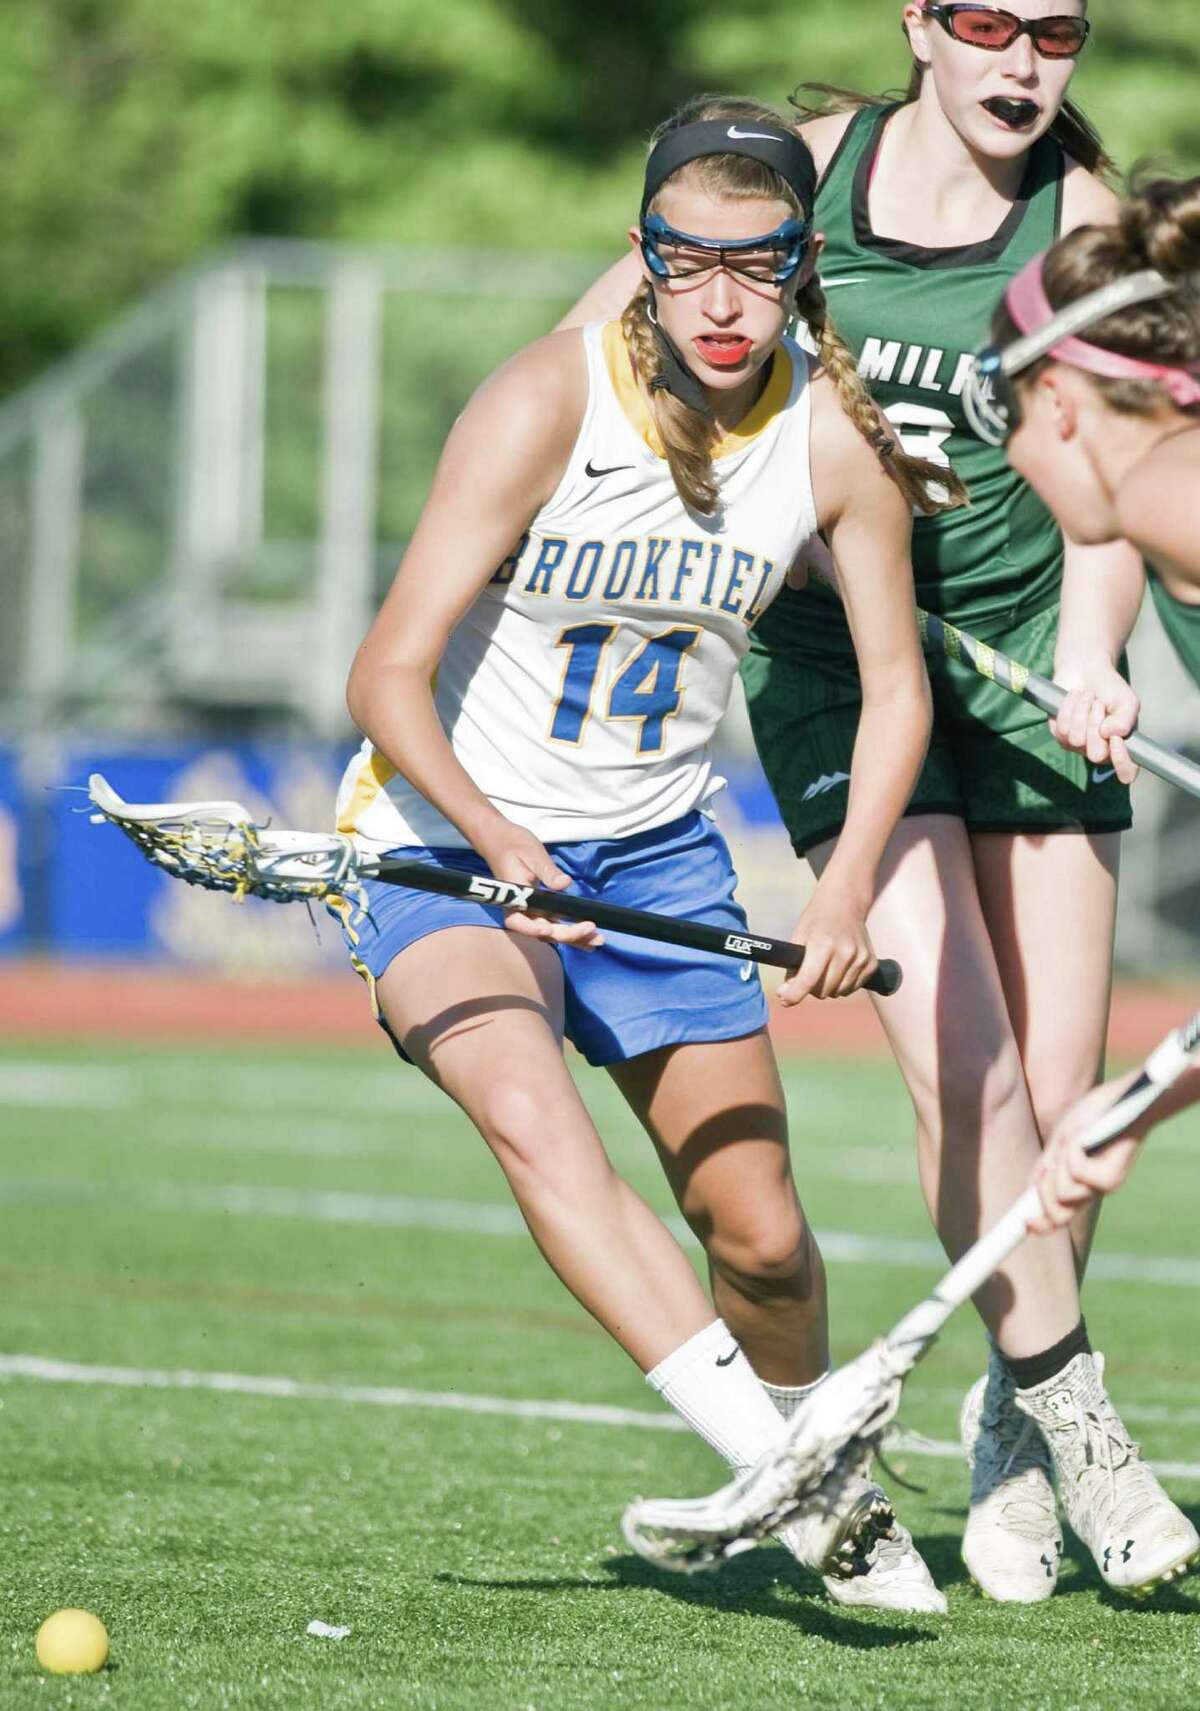 Brookfield High School's Savannah Ryan tries to get to the loose ball during the SWC Division I quarterfinals against New Milford High School, played at Brookfield. Friday, May 22, 2015